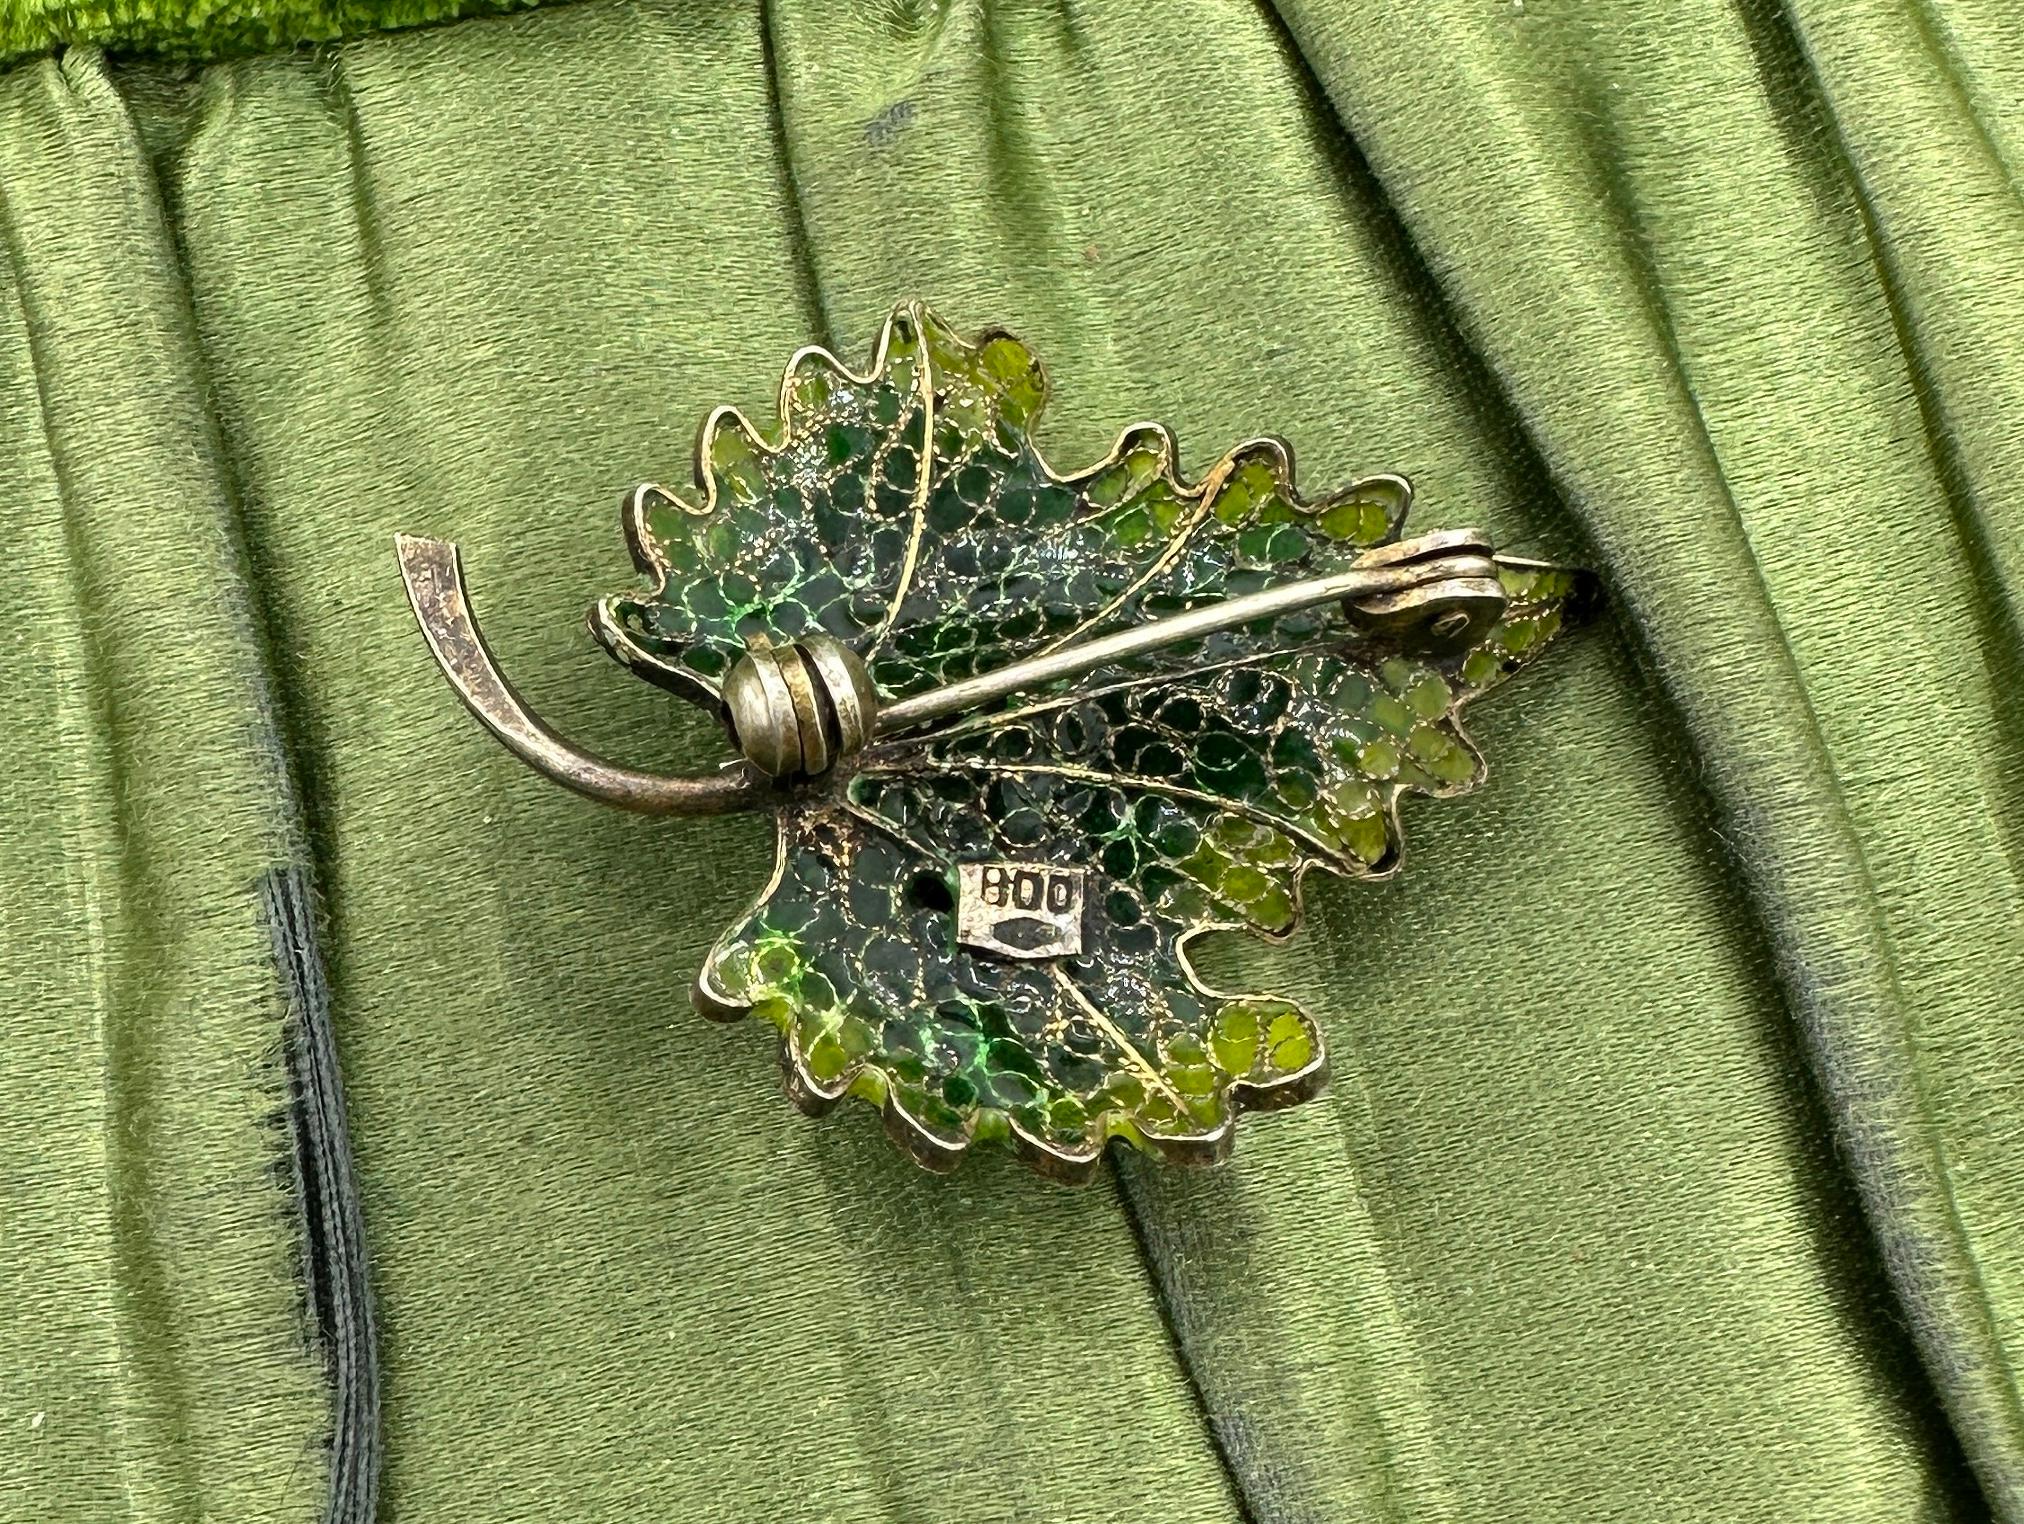 THIS IS A WONDERFUL AND RARE INSECT FLY BUG MOTIF PLIQUE-A-JOUR ENAMEL ART NOUVEAU BROOCH PIN IN SILVER.  THE MAGNIFICENT JEWEL FEATURES A WONDROUS FLY WITH BLUE WINGS ATOP A PLIQUE-A-JOUR ENAMEL LEAF WITH FABULOUS SHADES OF GREEN ENAMEL WITH